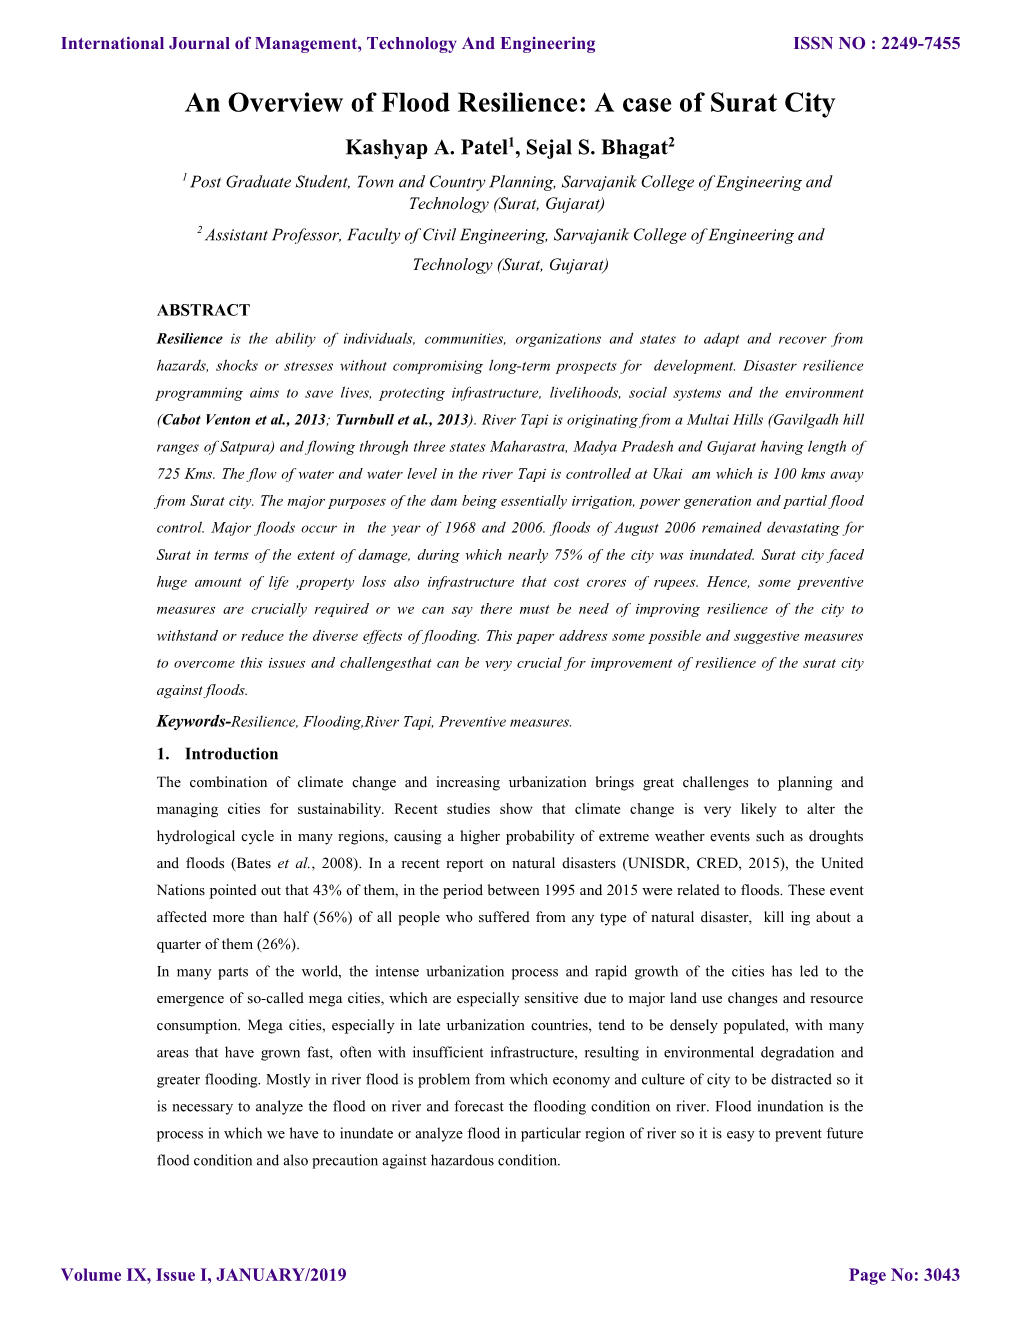 An Overview of Flood Resilience: a Case of Surat City Kashyap A